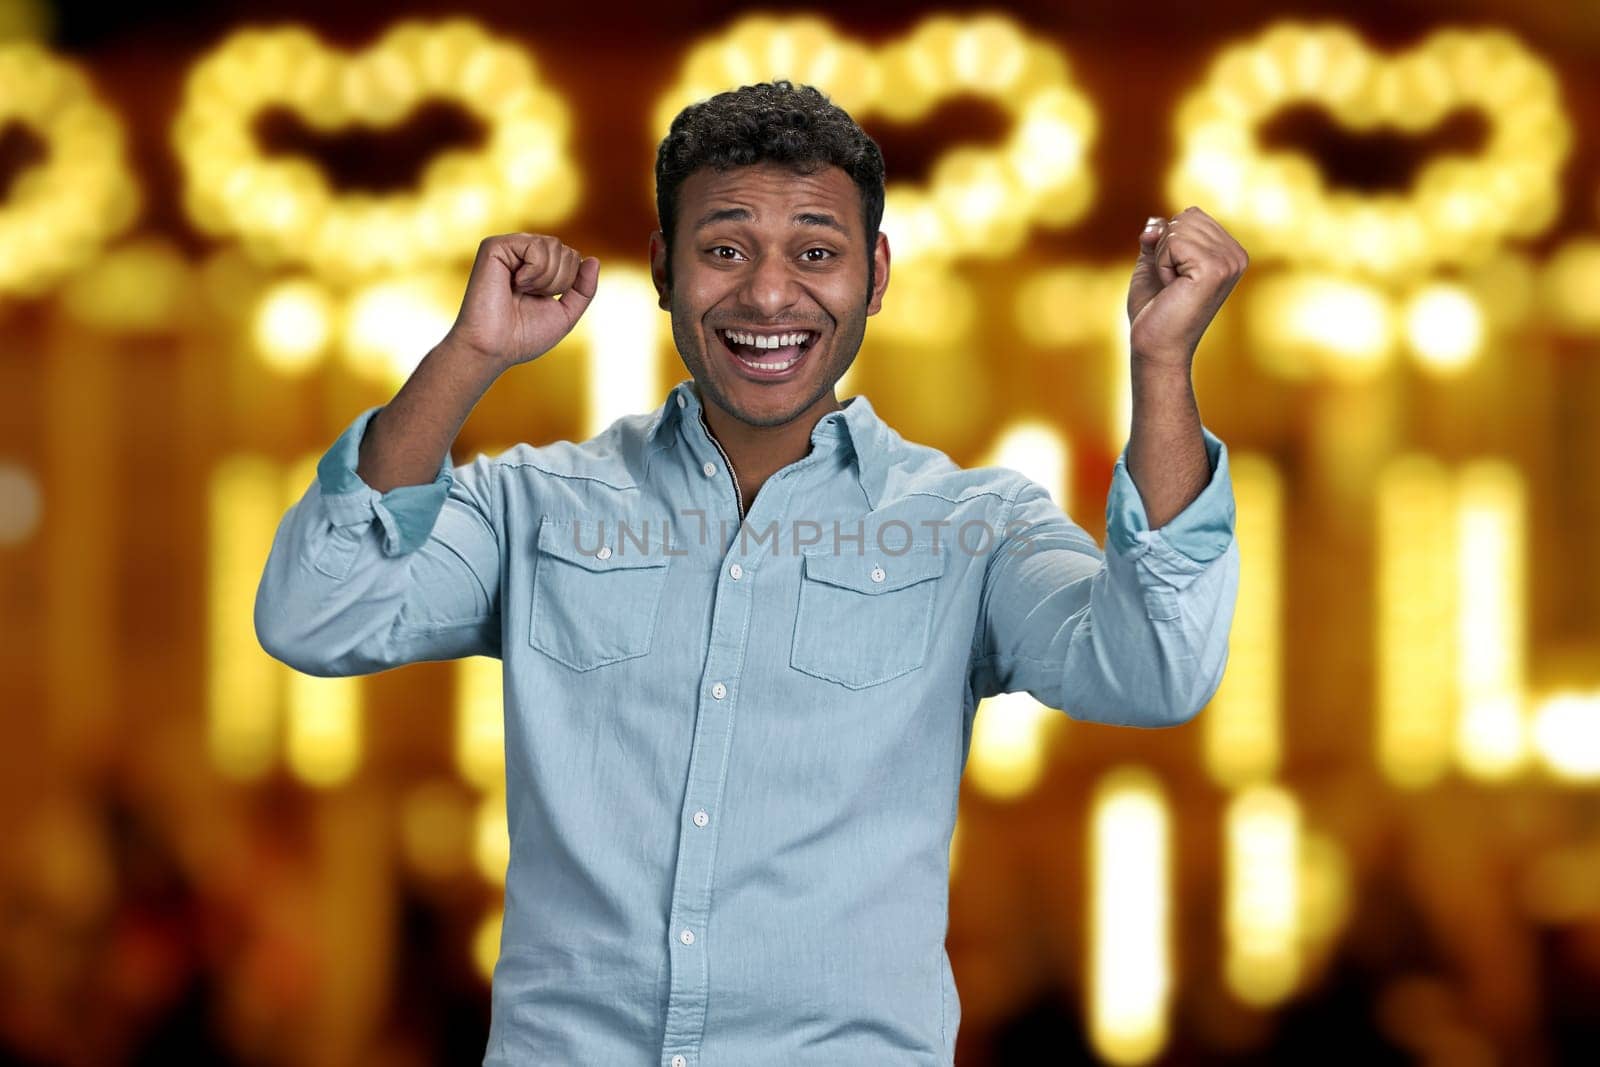 Young excited man celebrating success with clenched fists. Golden bokeh lights in the backgorund.